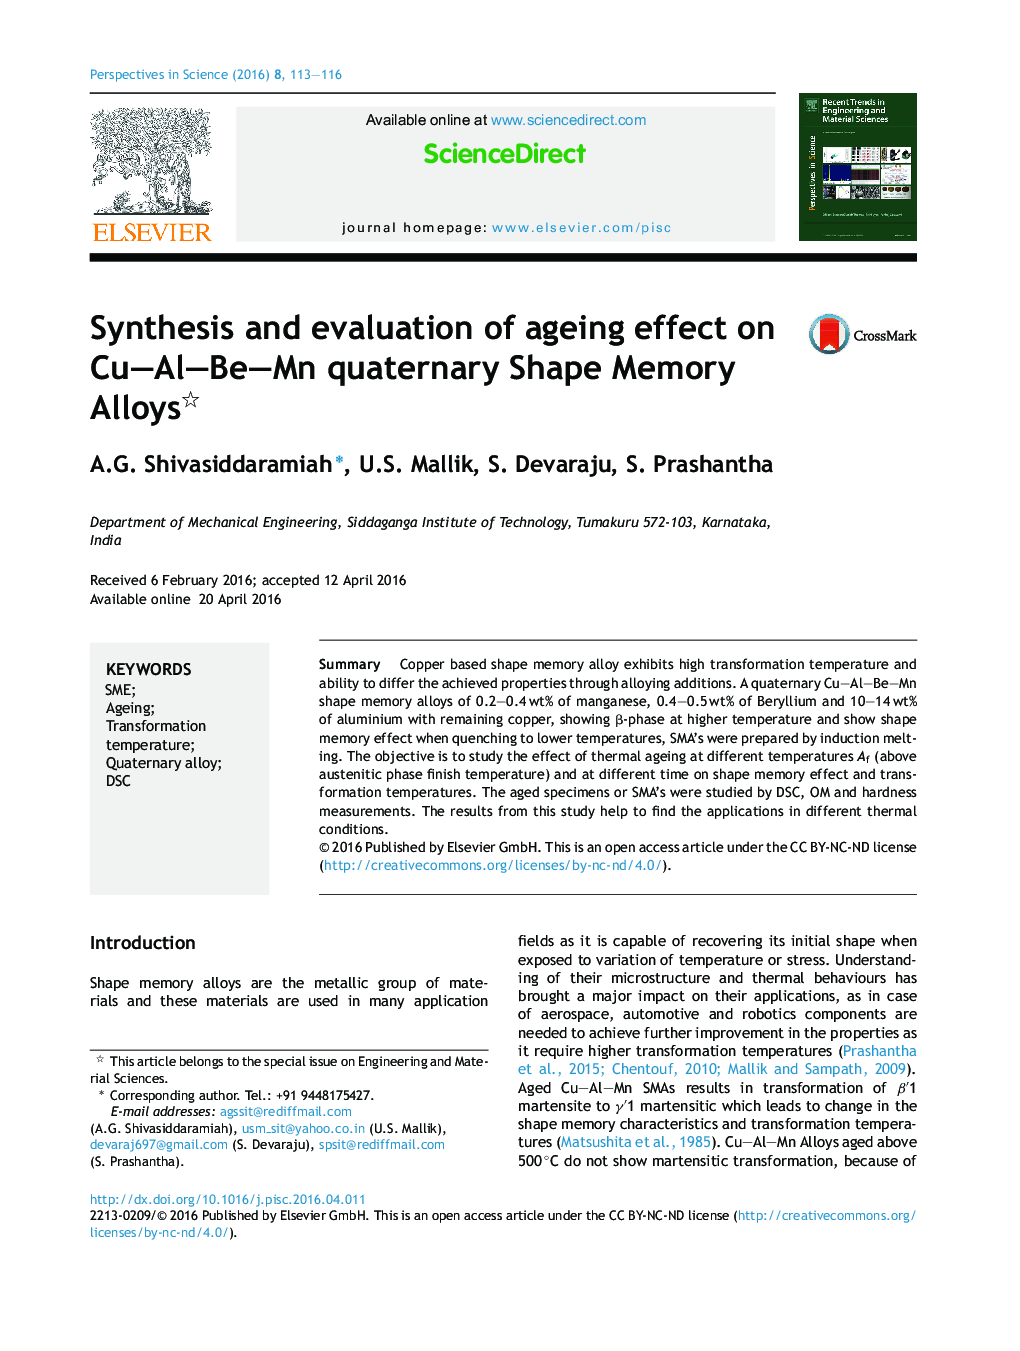 Synthesis and evaluation of ageing effect on Cu-Al-Be-Mn quaternary Shape Memory Alloys